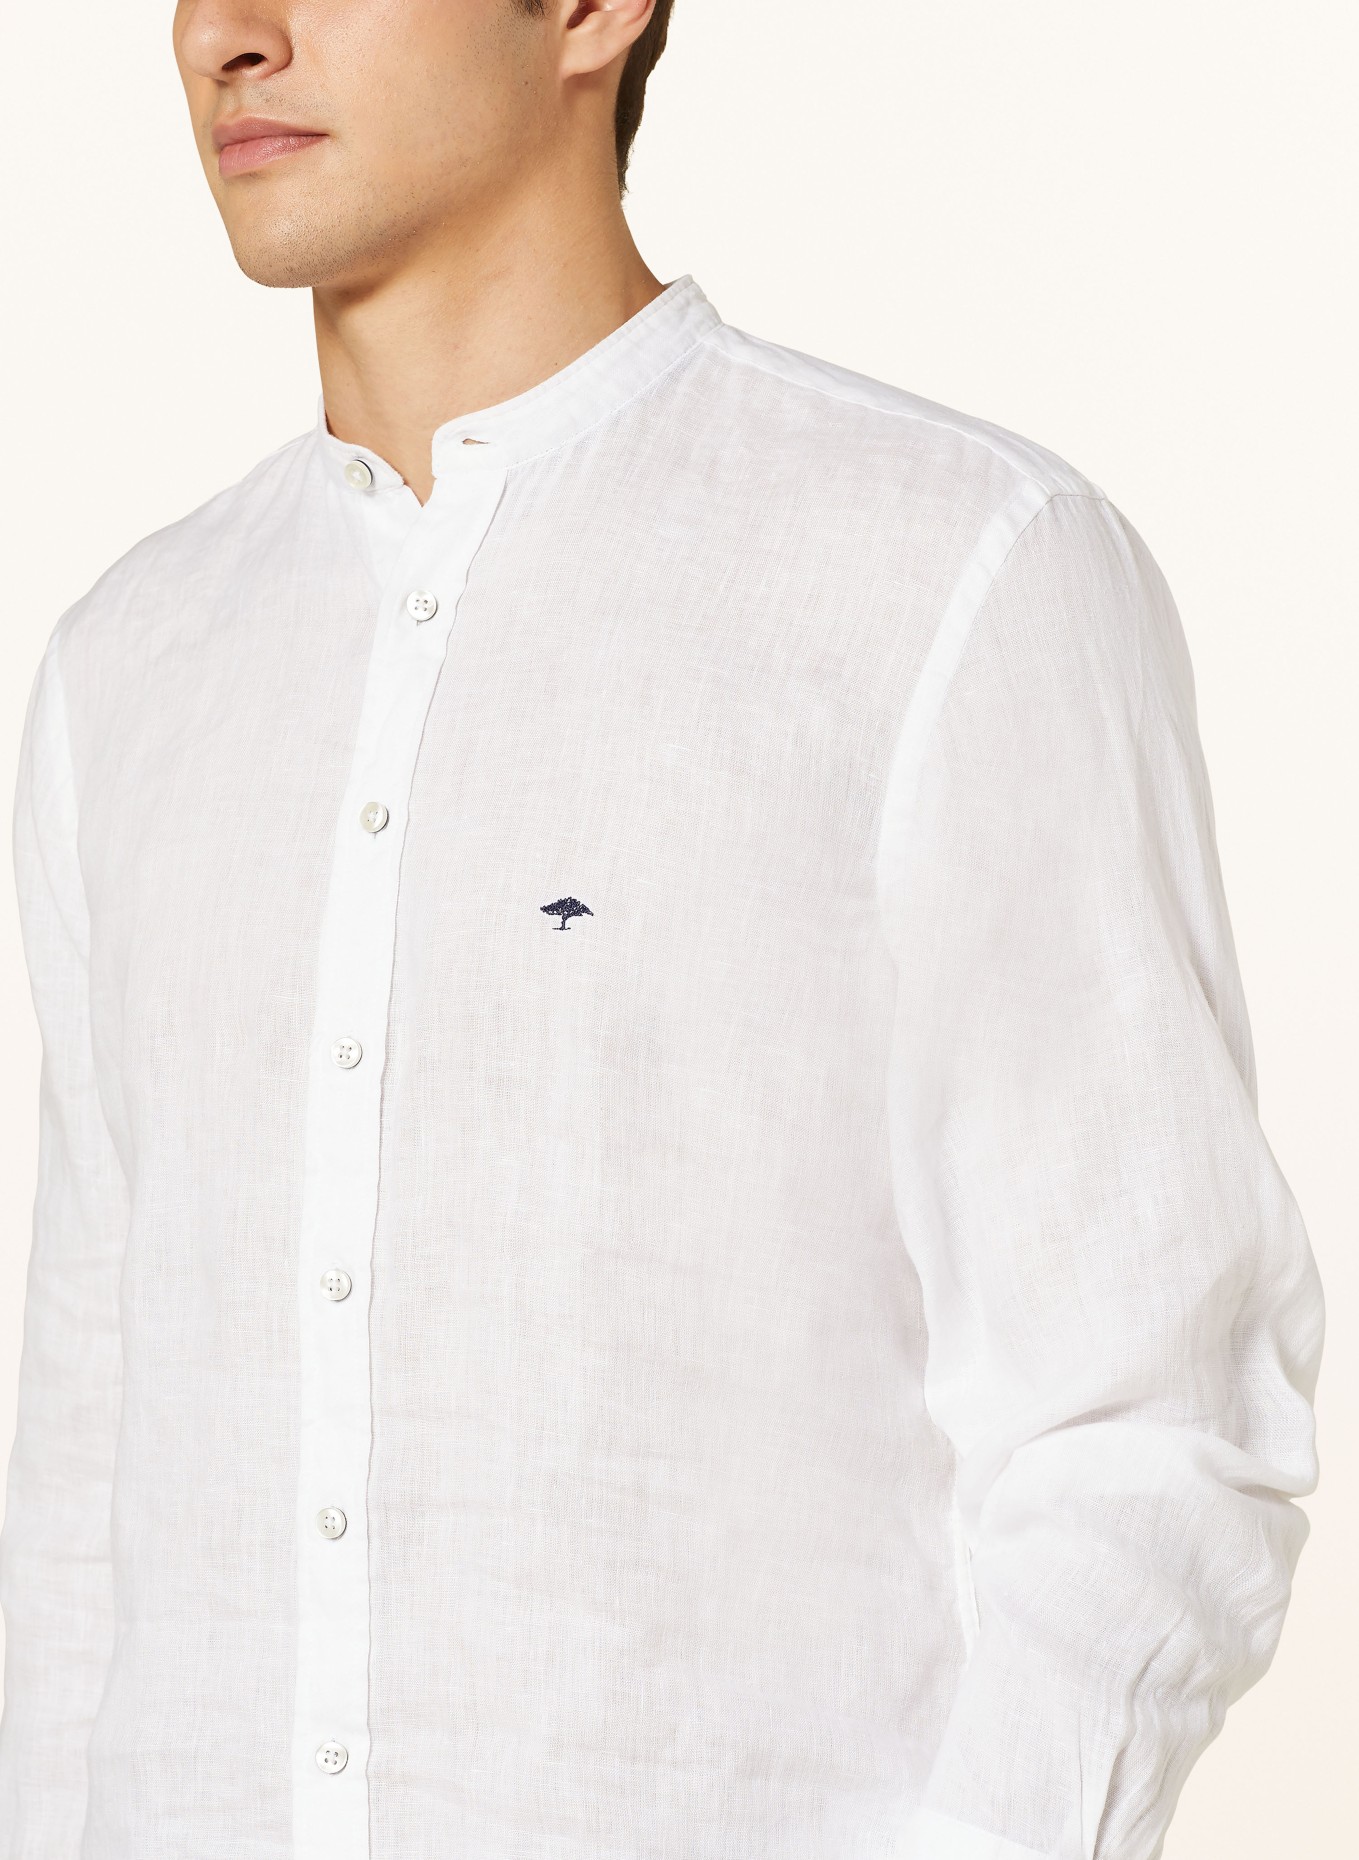 FYNCH-HATTON Linen shirt regular fit with stand-up collar, Color: WHITE (Image 4)